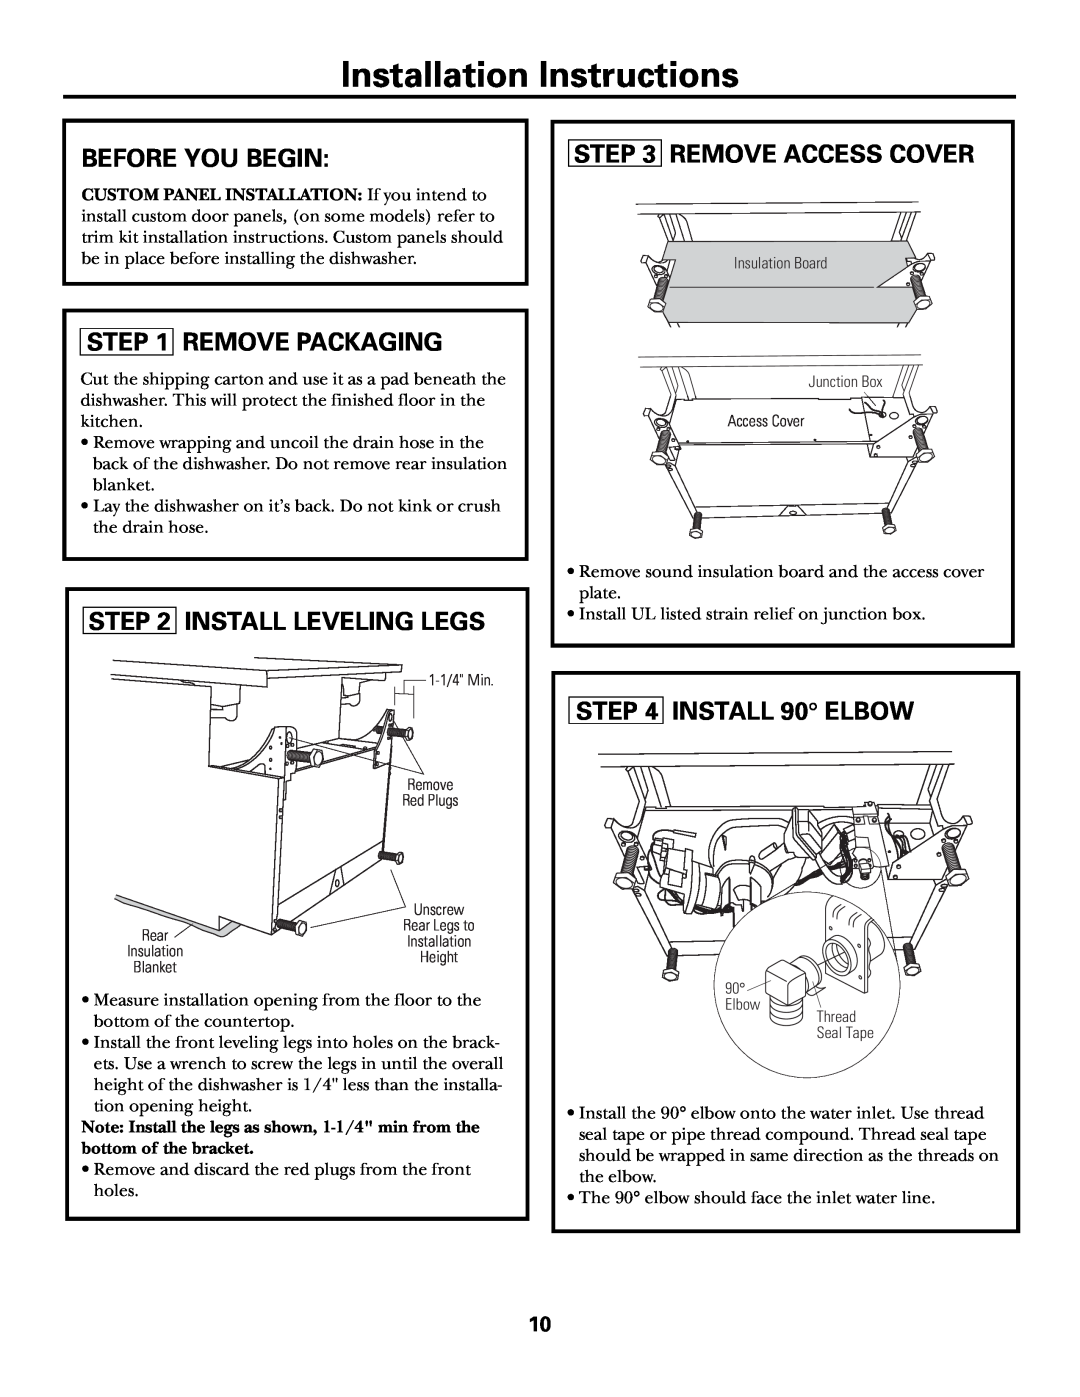 GE ZBD7005 Installation Instructions, Before You Begin, Remove Packaging, Install Leveling Legs, Remove Access Cover 